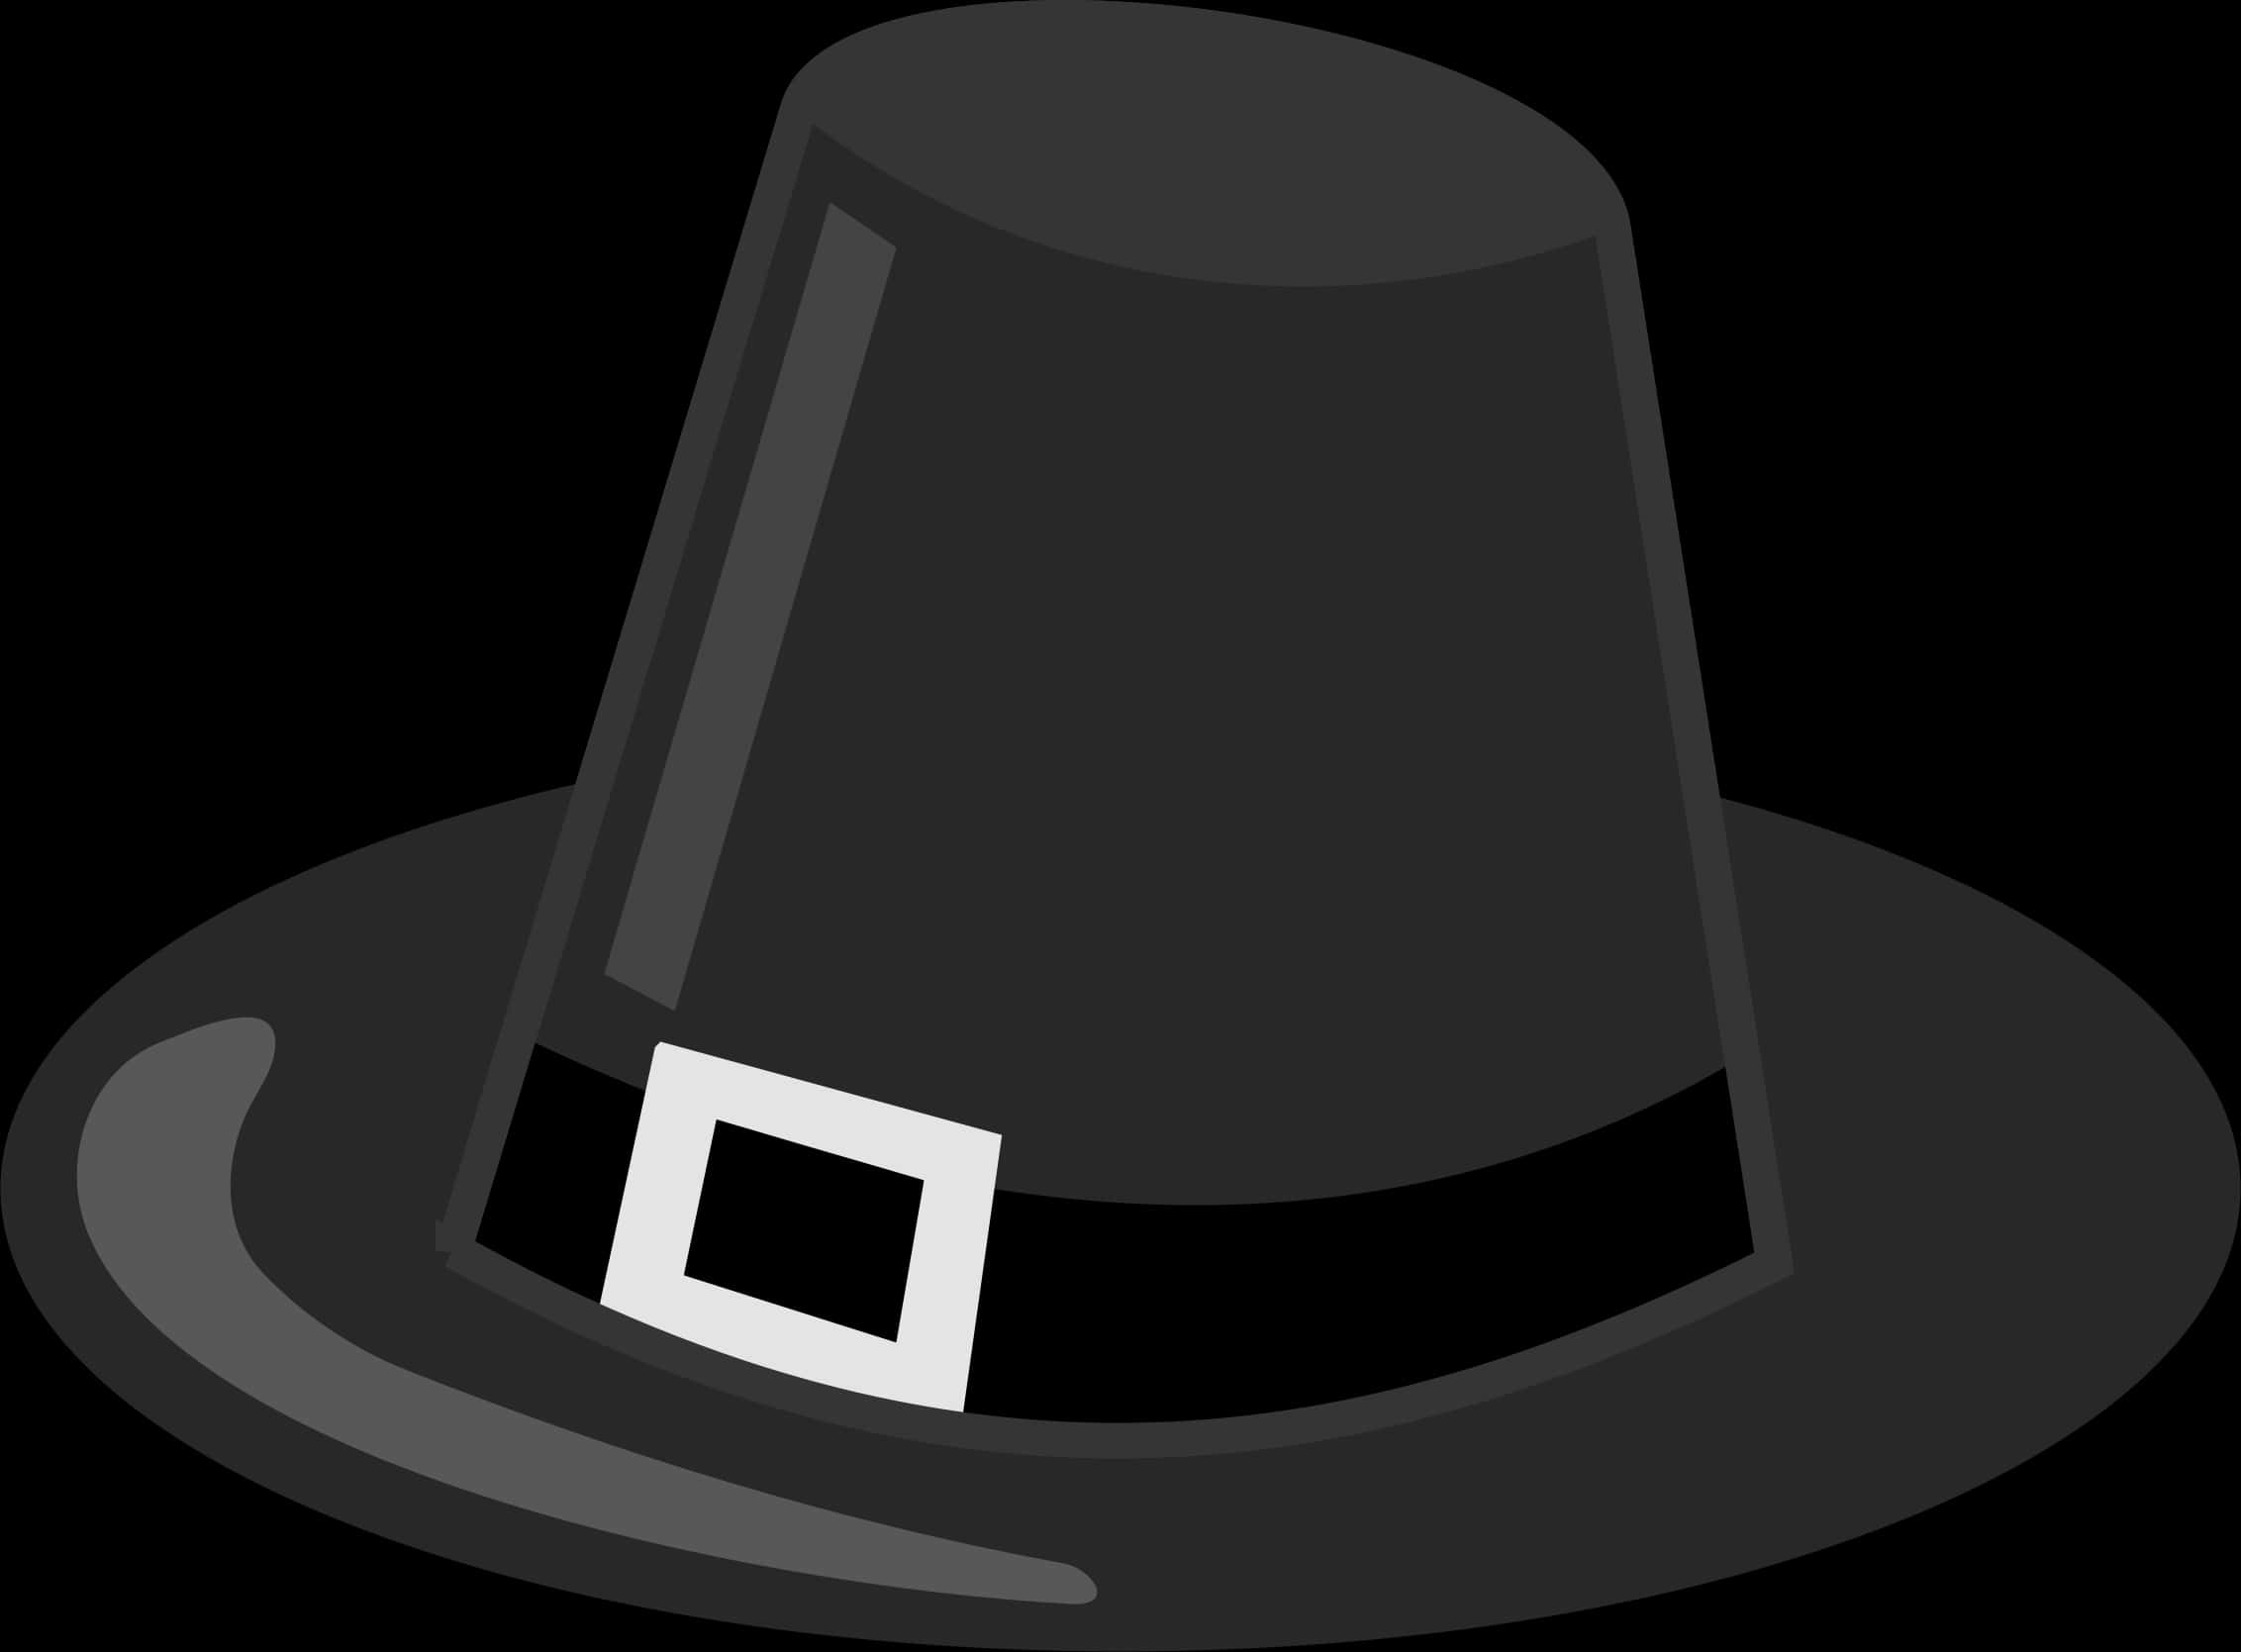 A Black Hat With A White Belt